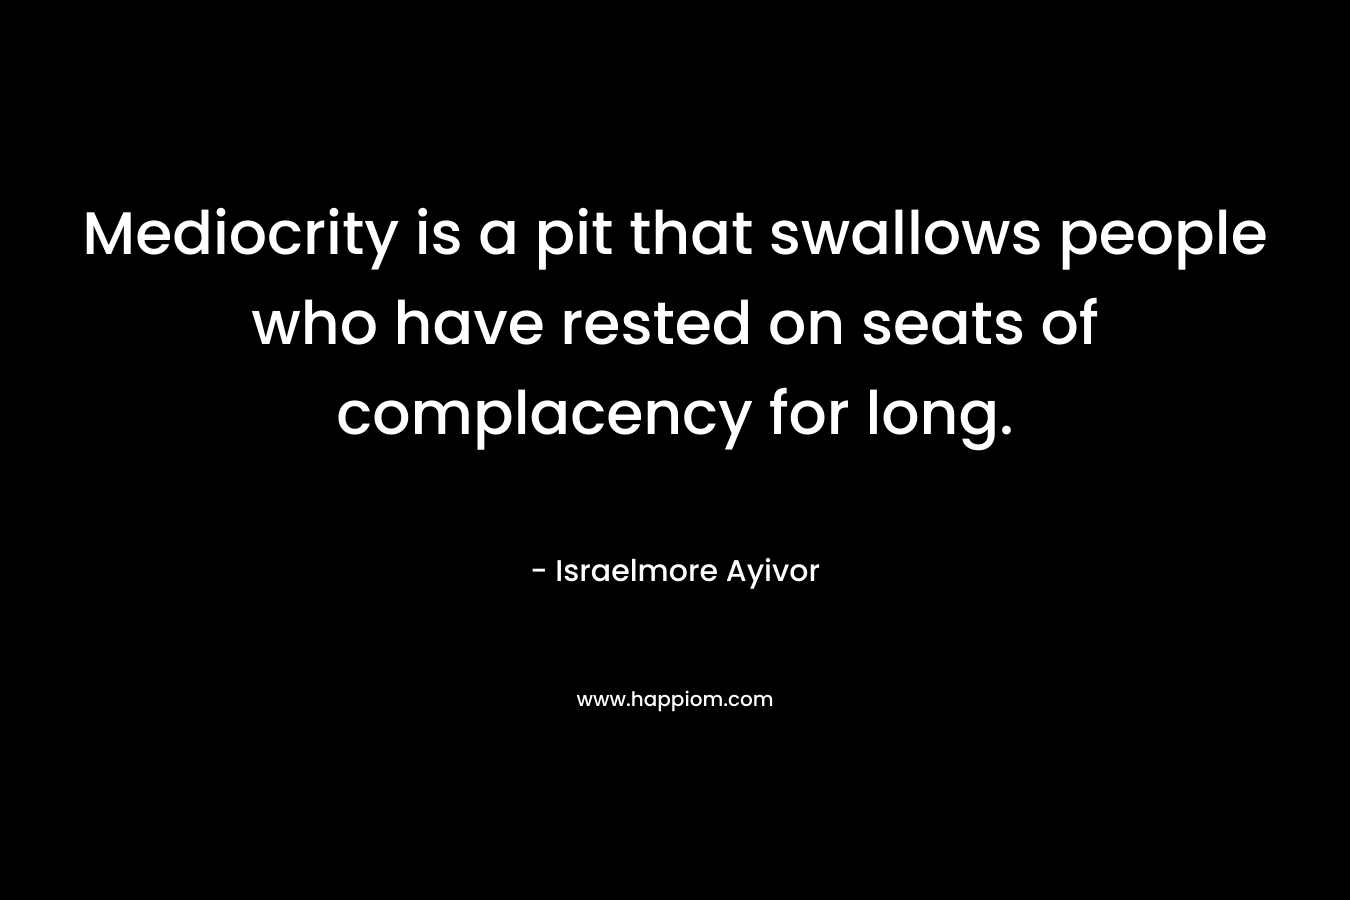 Mediocrity is a pit that swallows people who have rested on seats of complacency for long. – Israelmore Ayivor